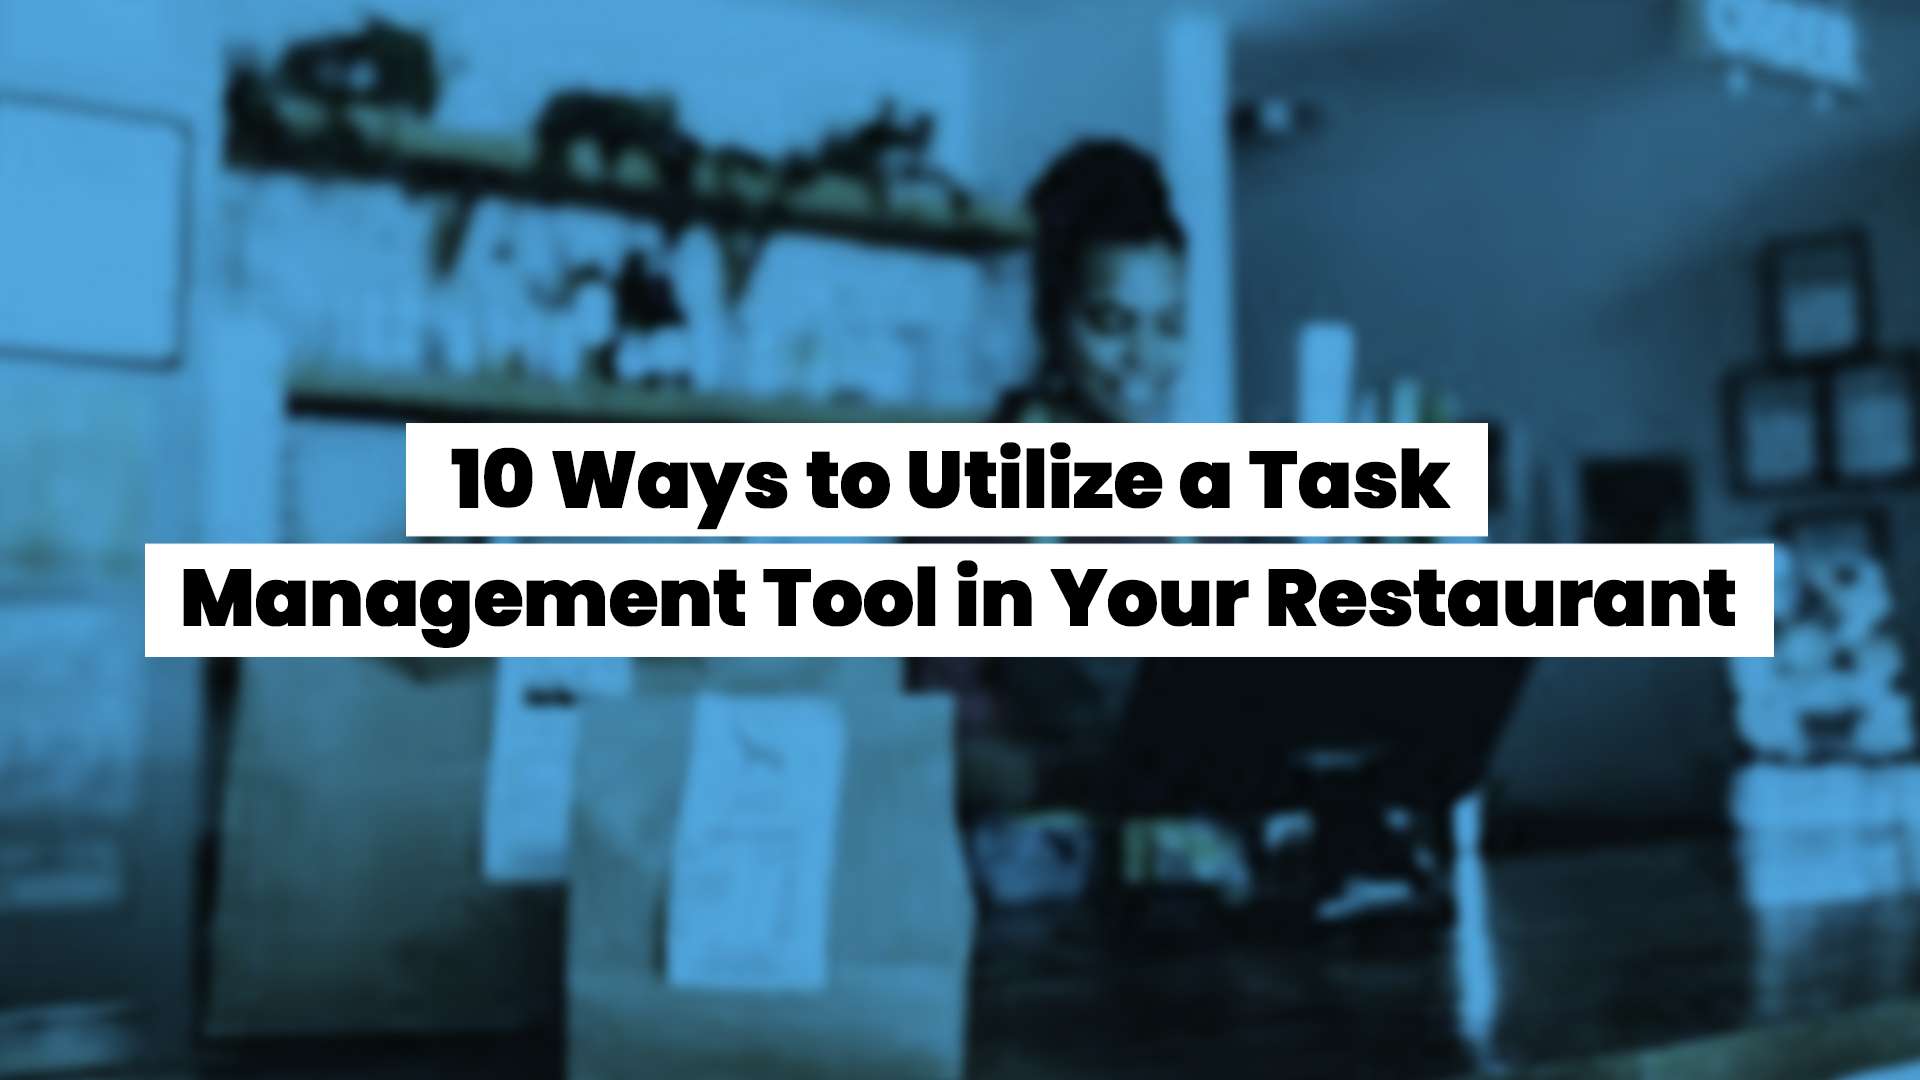 10 ways to utilize a task management tool in your restaurant